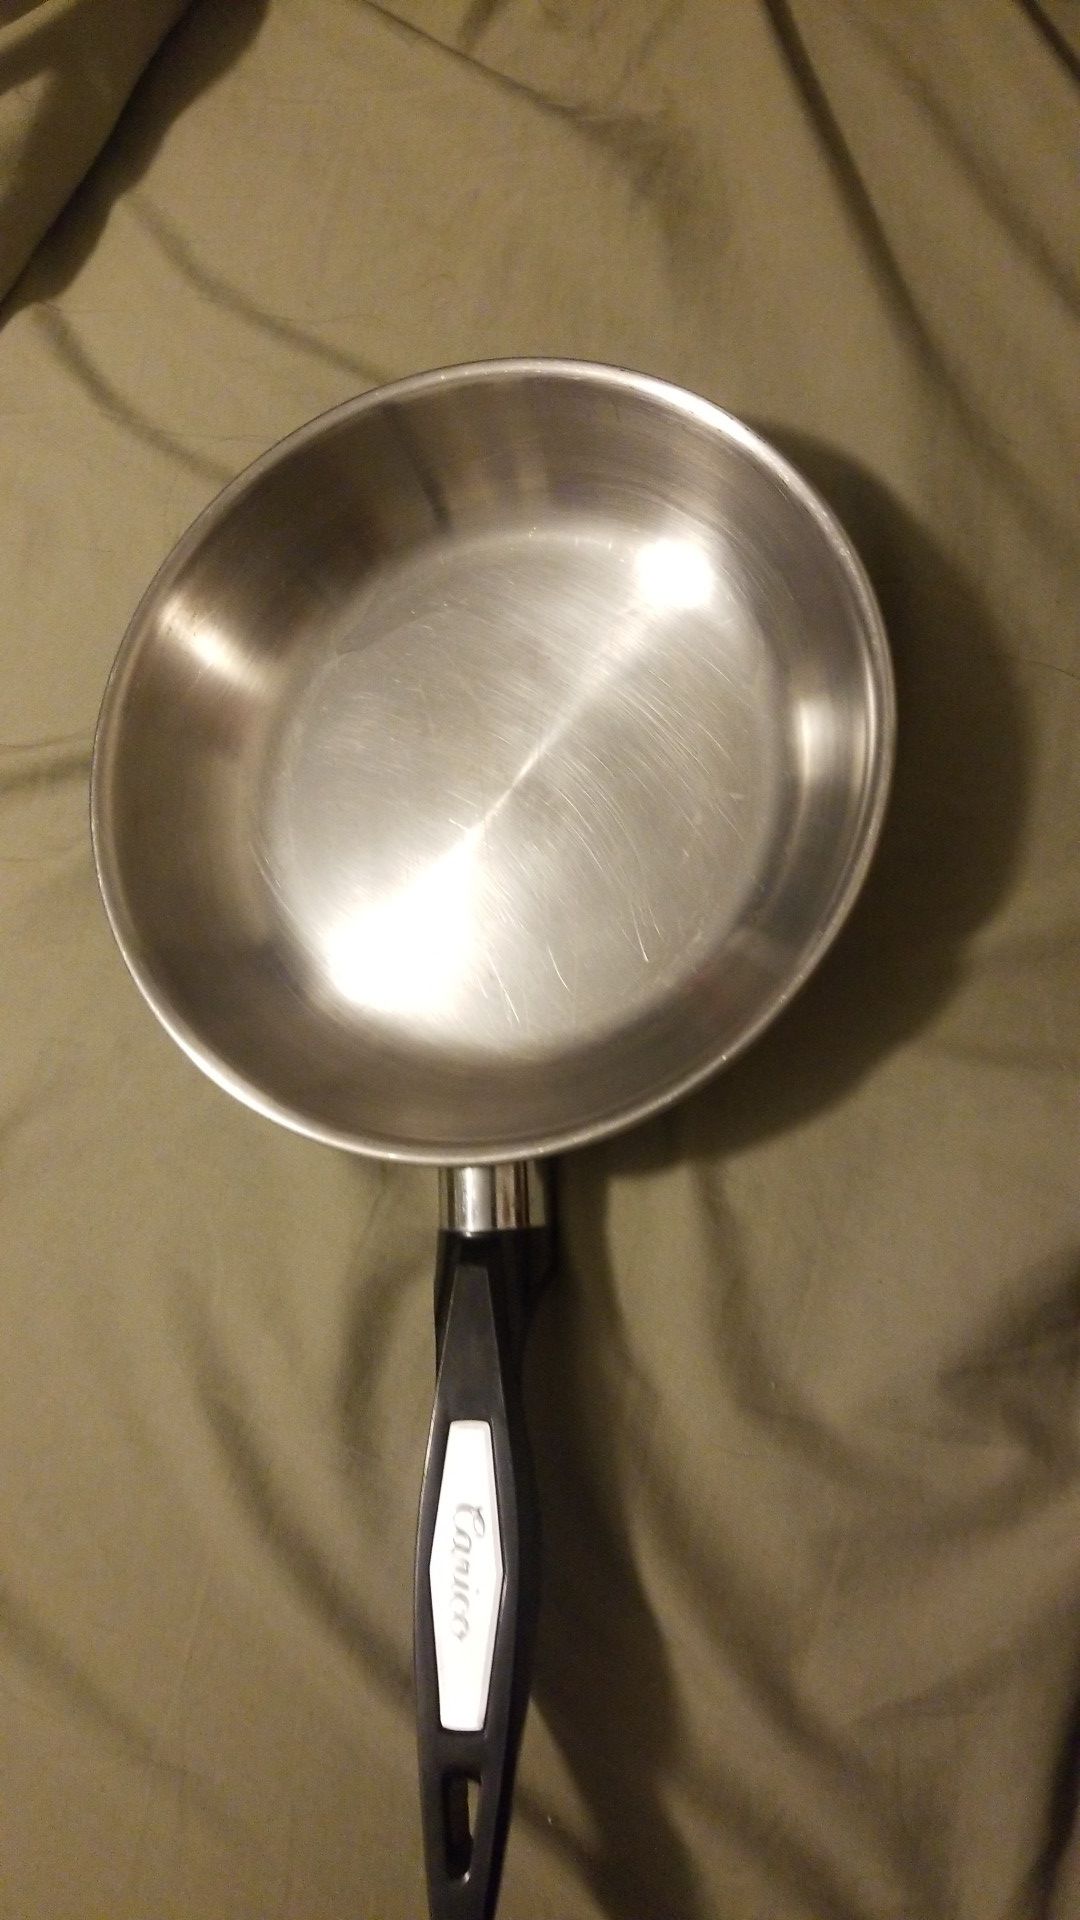 48 Cupcake Non-stick Pan for Sale in Tracy, CA - OfferUp